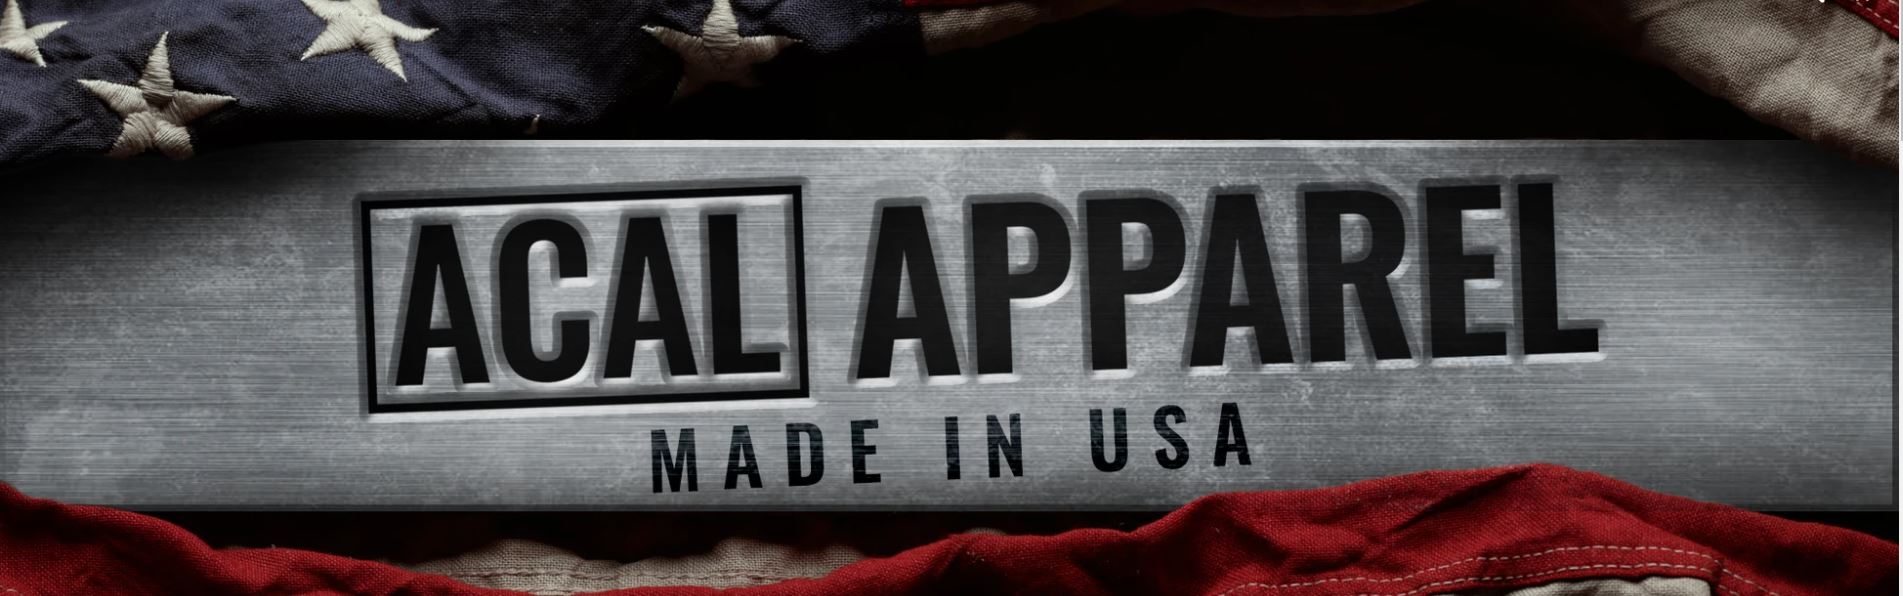 ACal Apparel Review 1